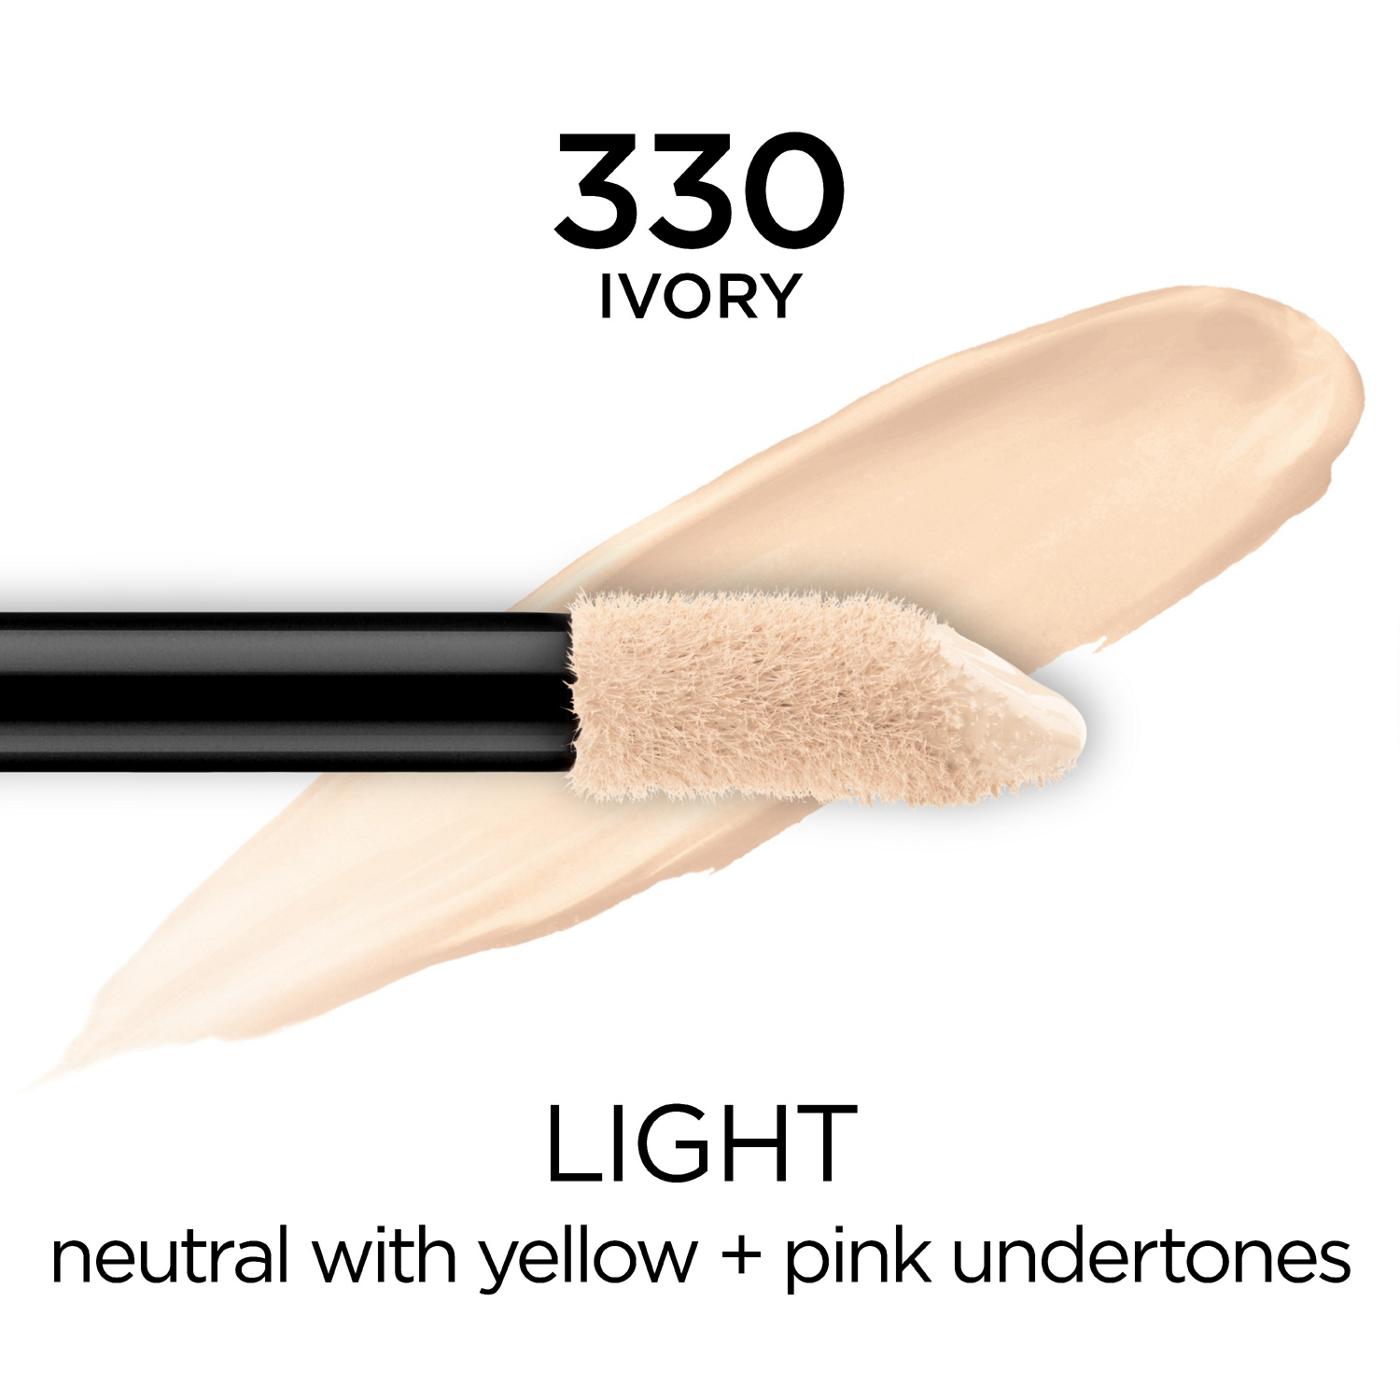 L'Oréal Paris Infallible Full Wear Concealer up to 24H Full Coverage Ivory; image 4 of 7